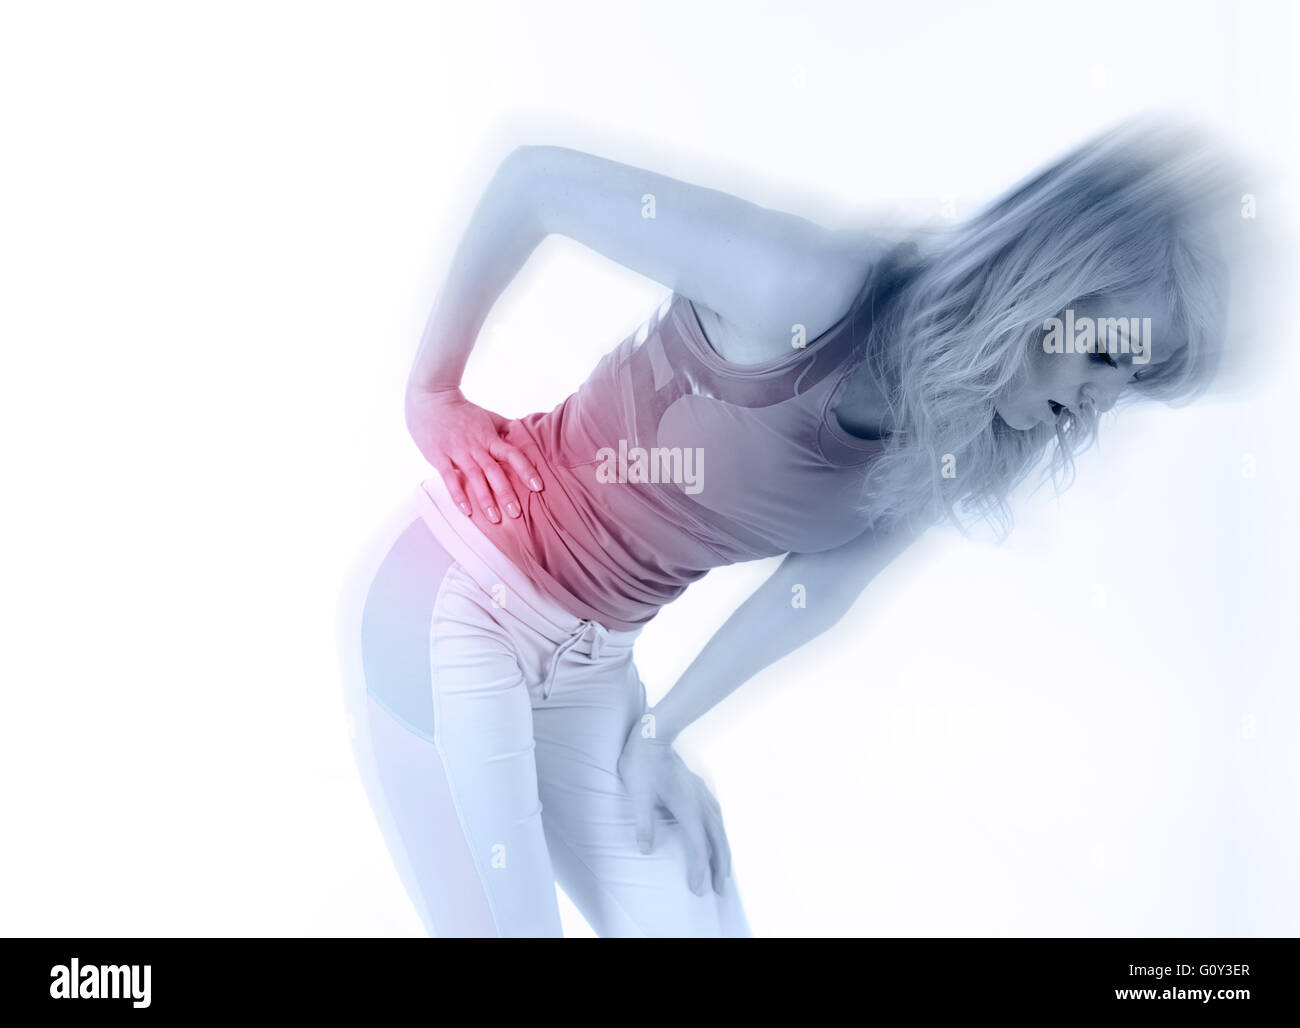 Woman athlete bent over in pain with side stitch cramp Stock Photo